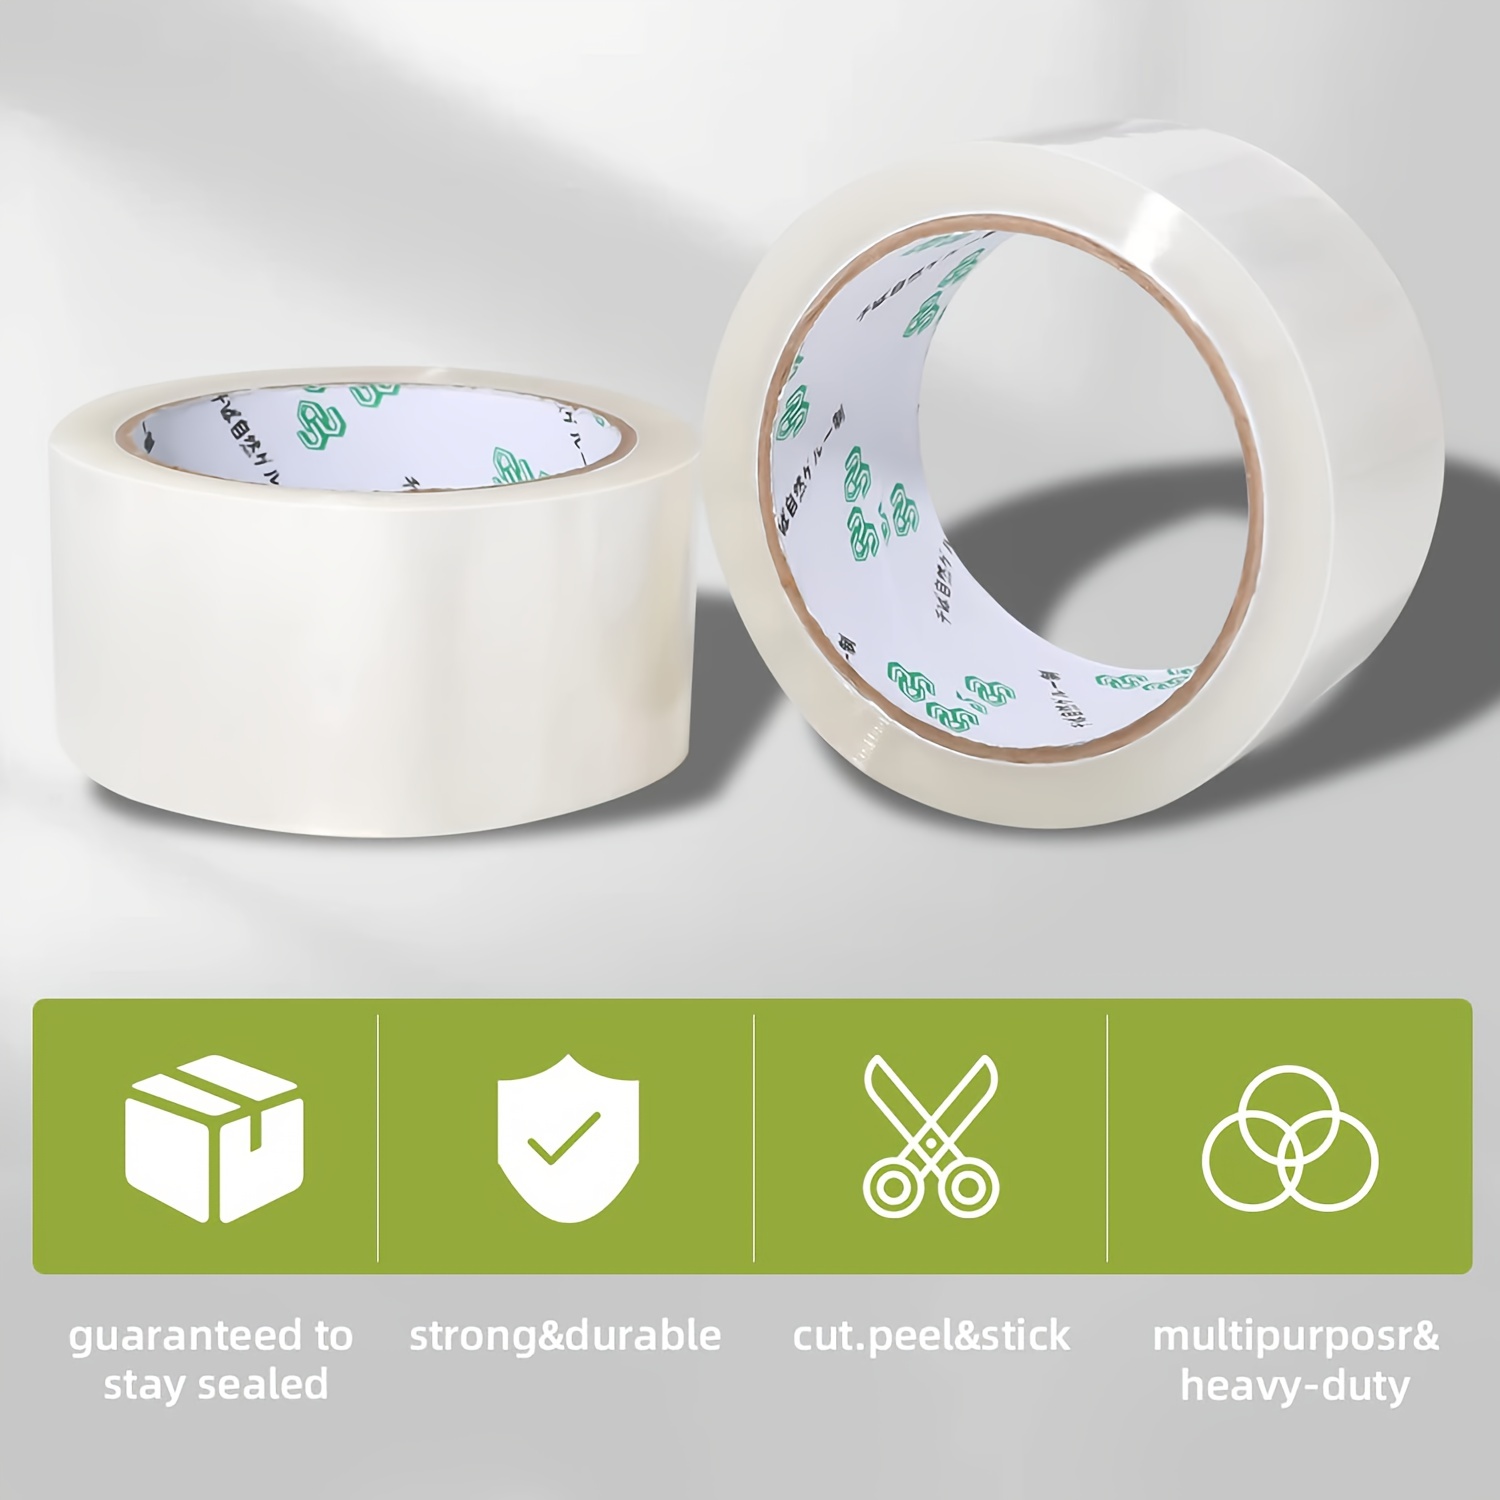 24mm (1 Inch) Packaging Tape